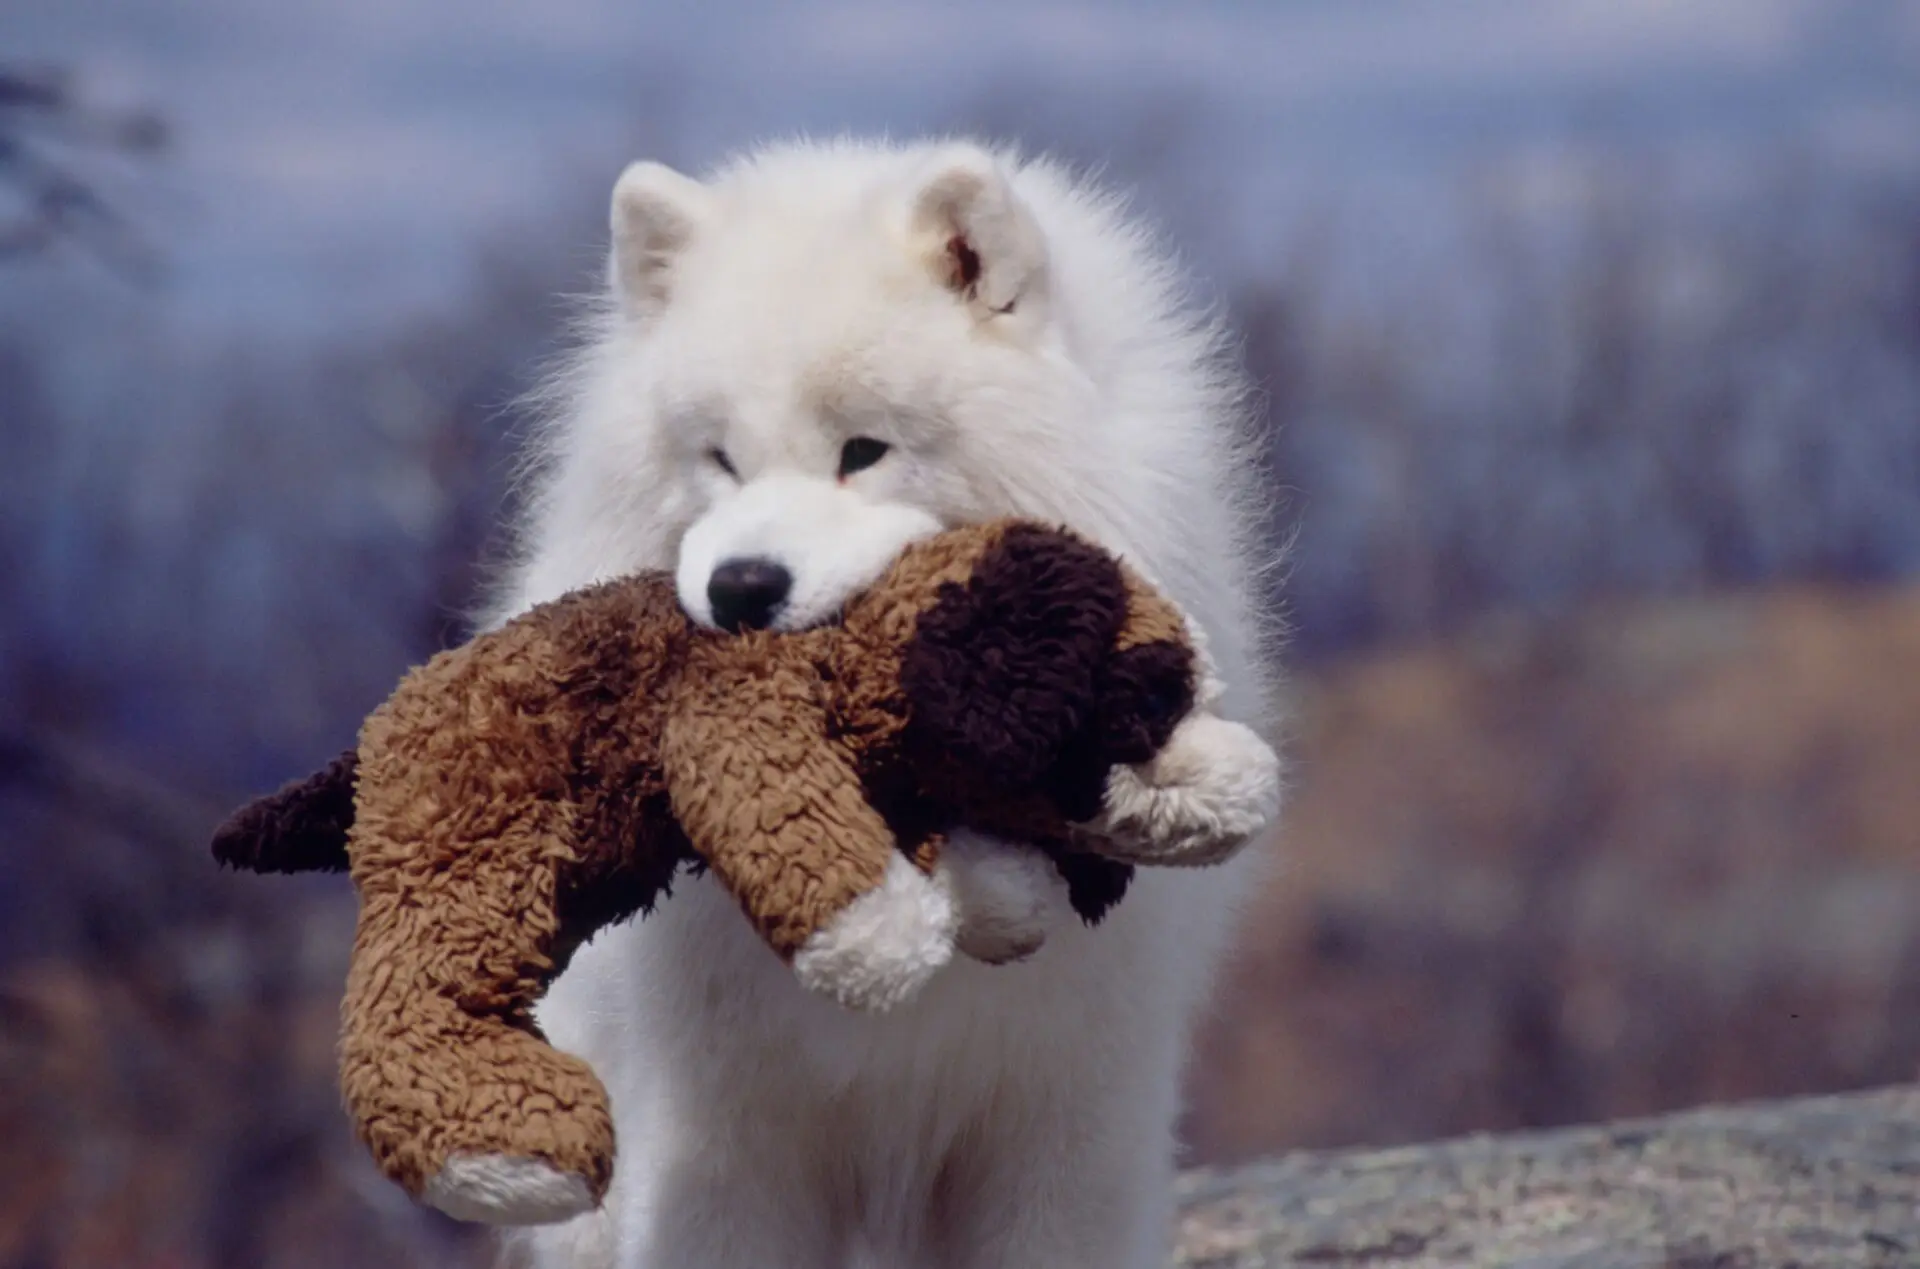 Shanticlaire and his teddy